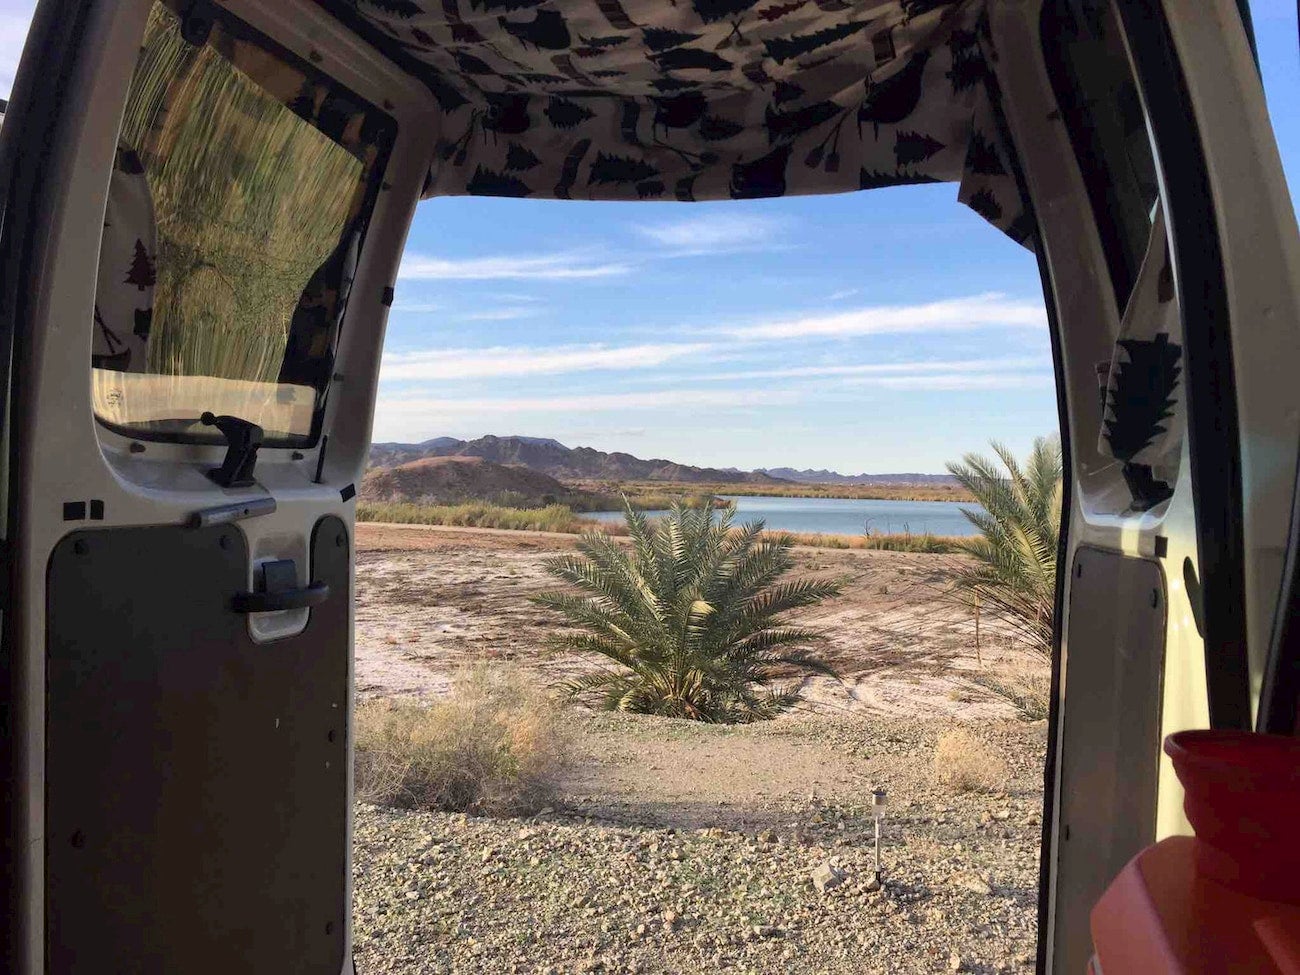 View through camper of tropical plants, desert, and lake.